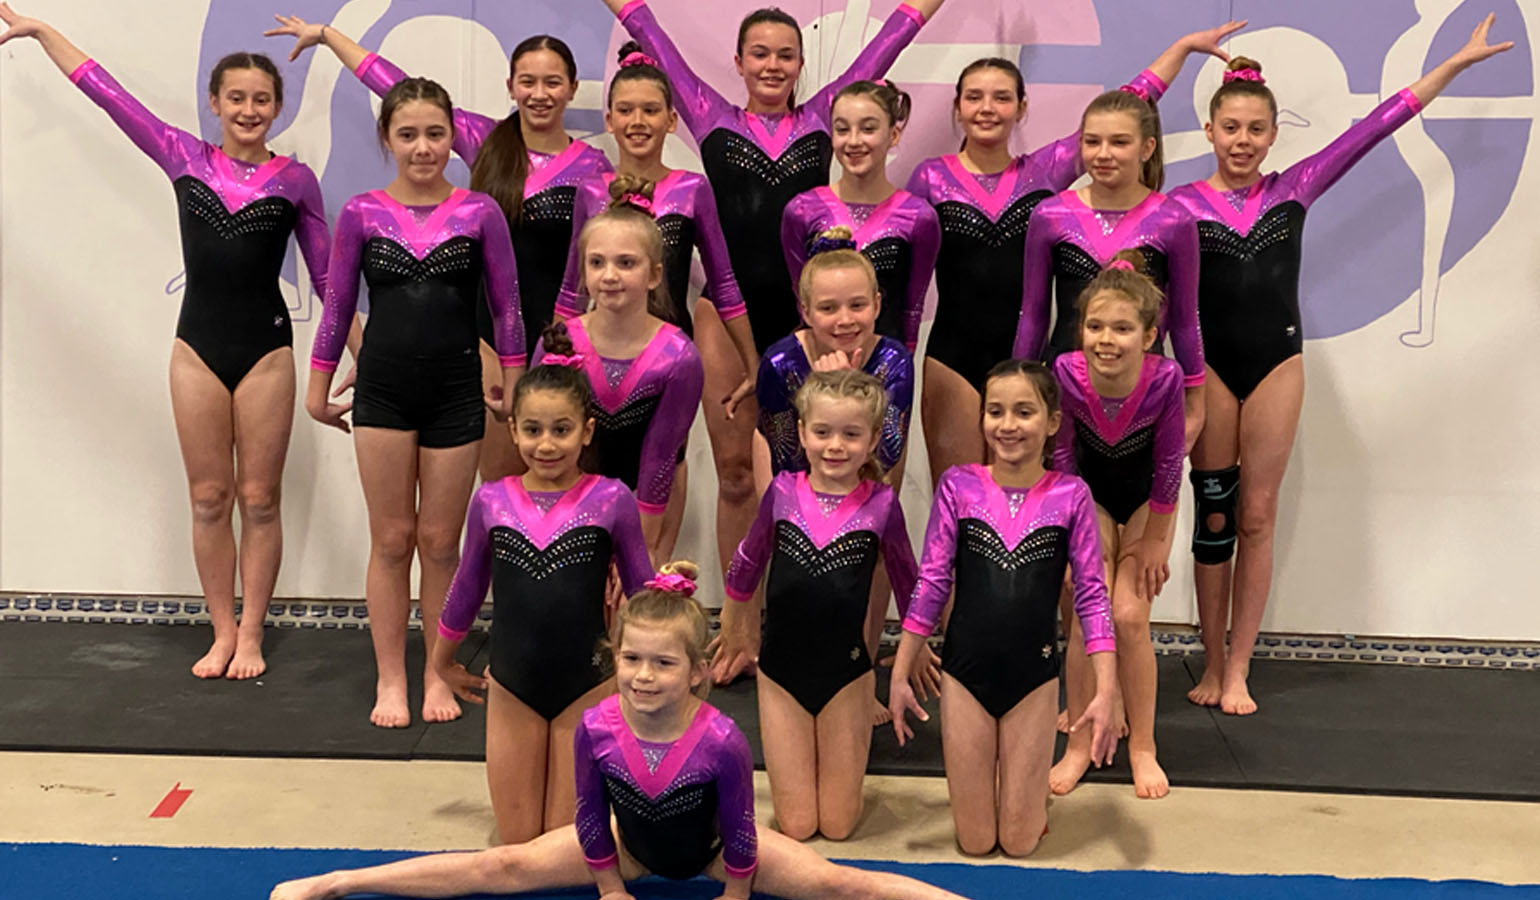 240 gymnasts compete at the Cotton Candy Classic in Cornwall